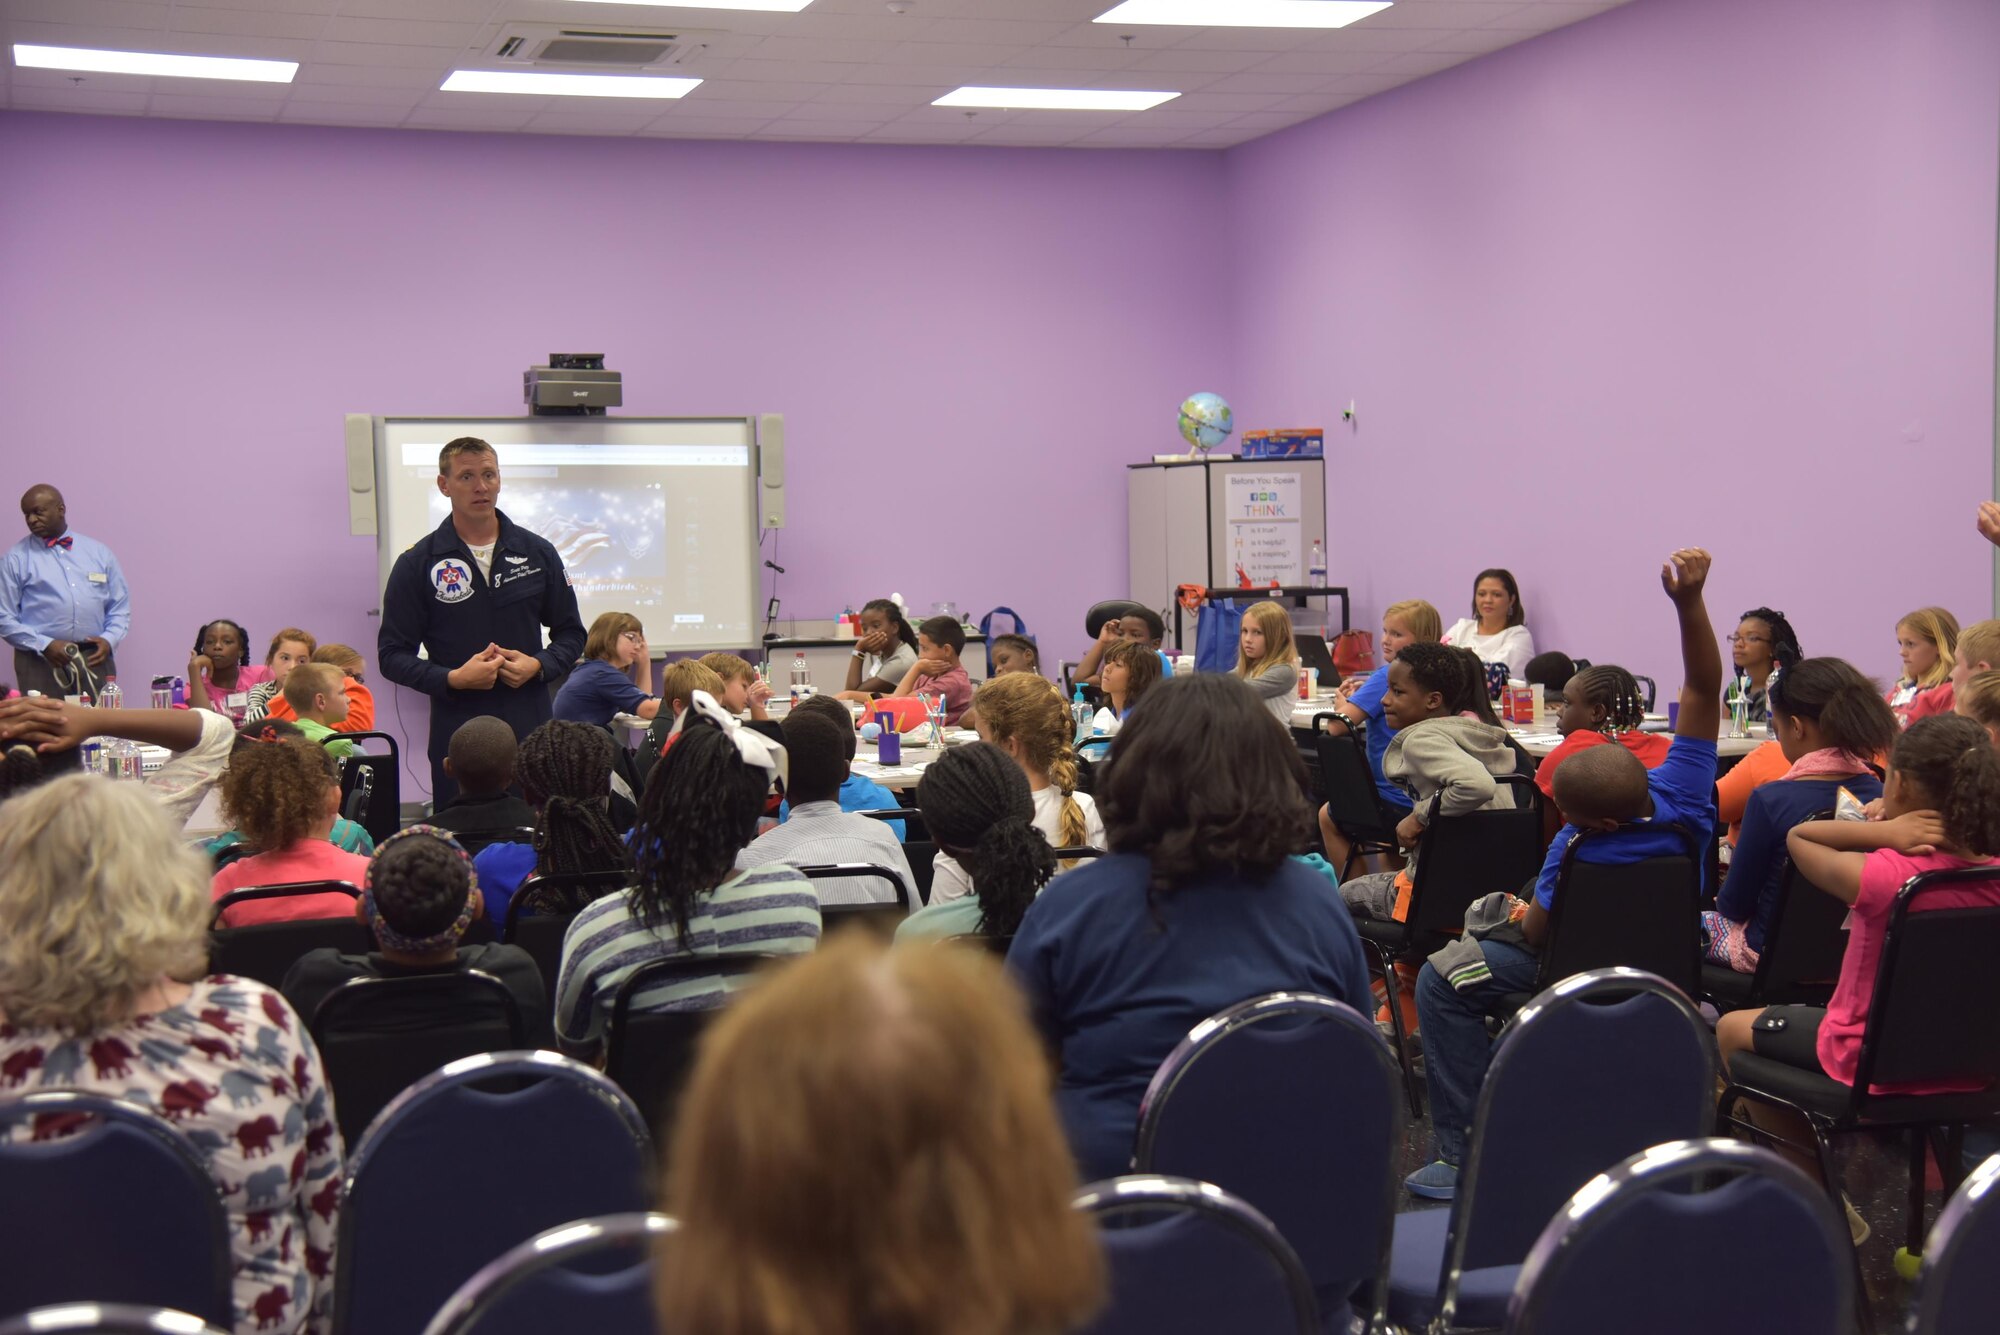 Maj. Scott Pitts, U.S. Air Force Thunderbirds No. 8 Pilot,  talks to Northside Elementary School 5th graders at Starbase Robins Sept. 29, 2016. (U.S. Air Force photo by Ray Crayton)

